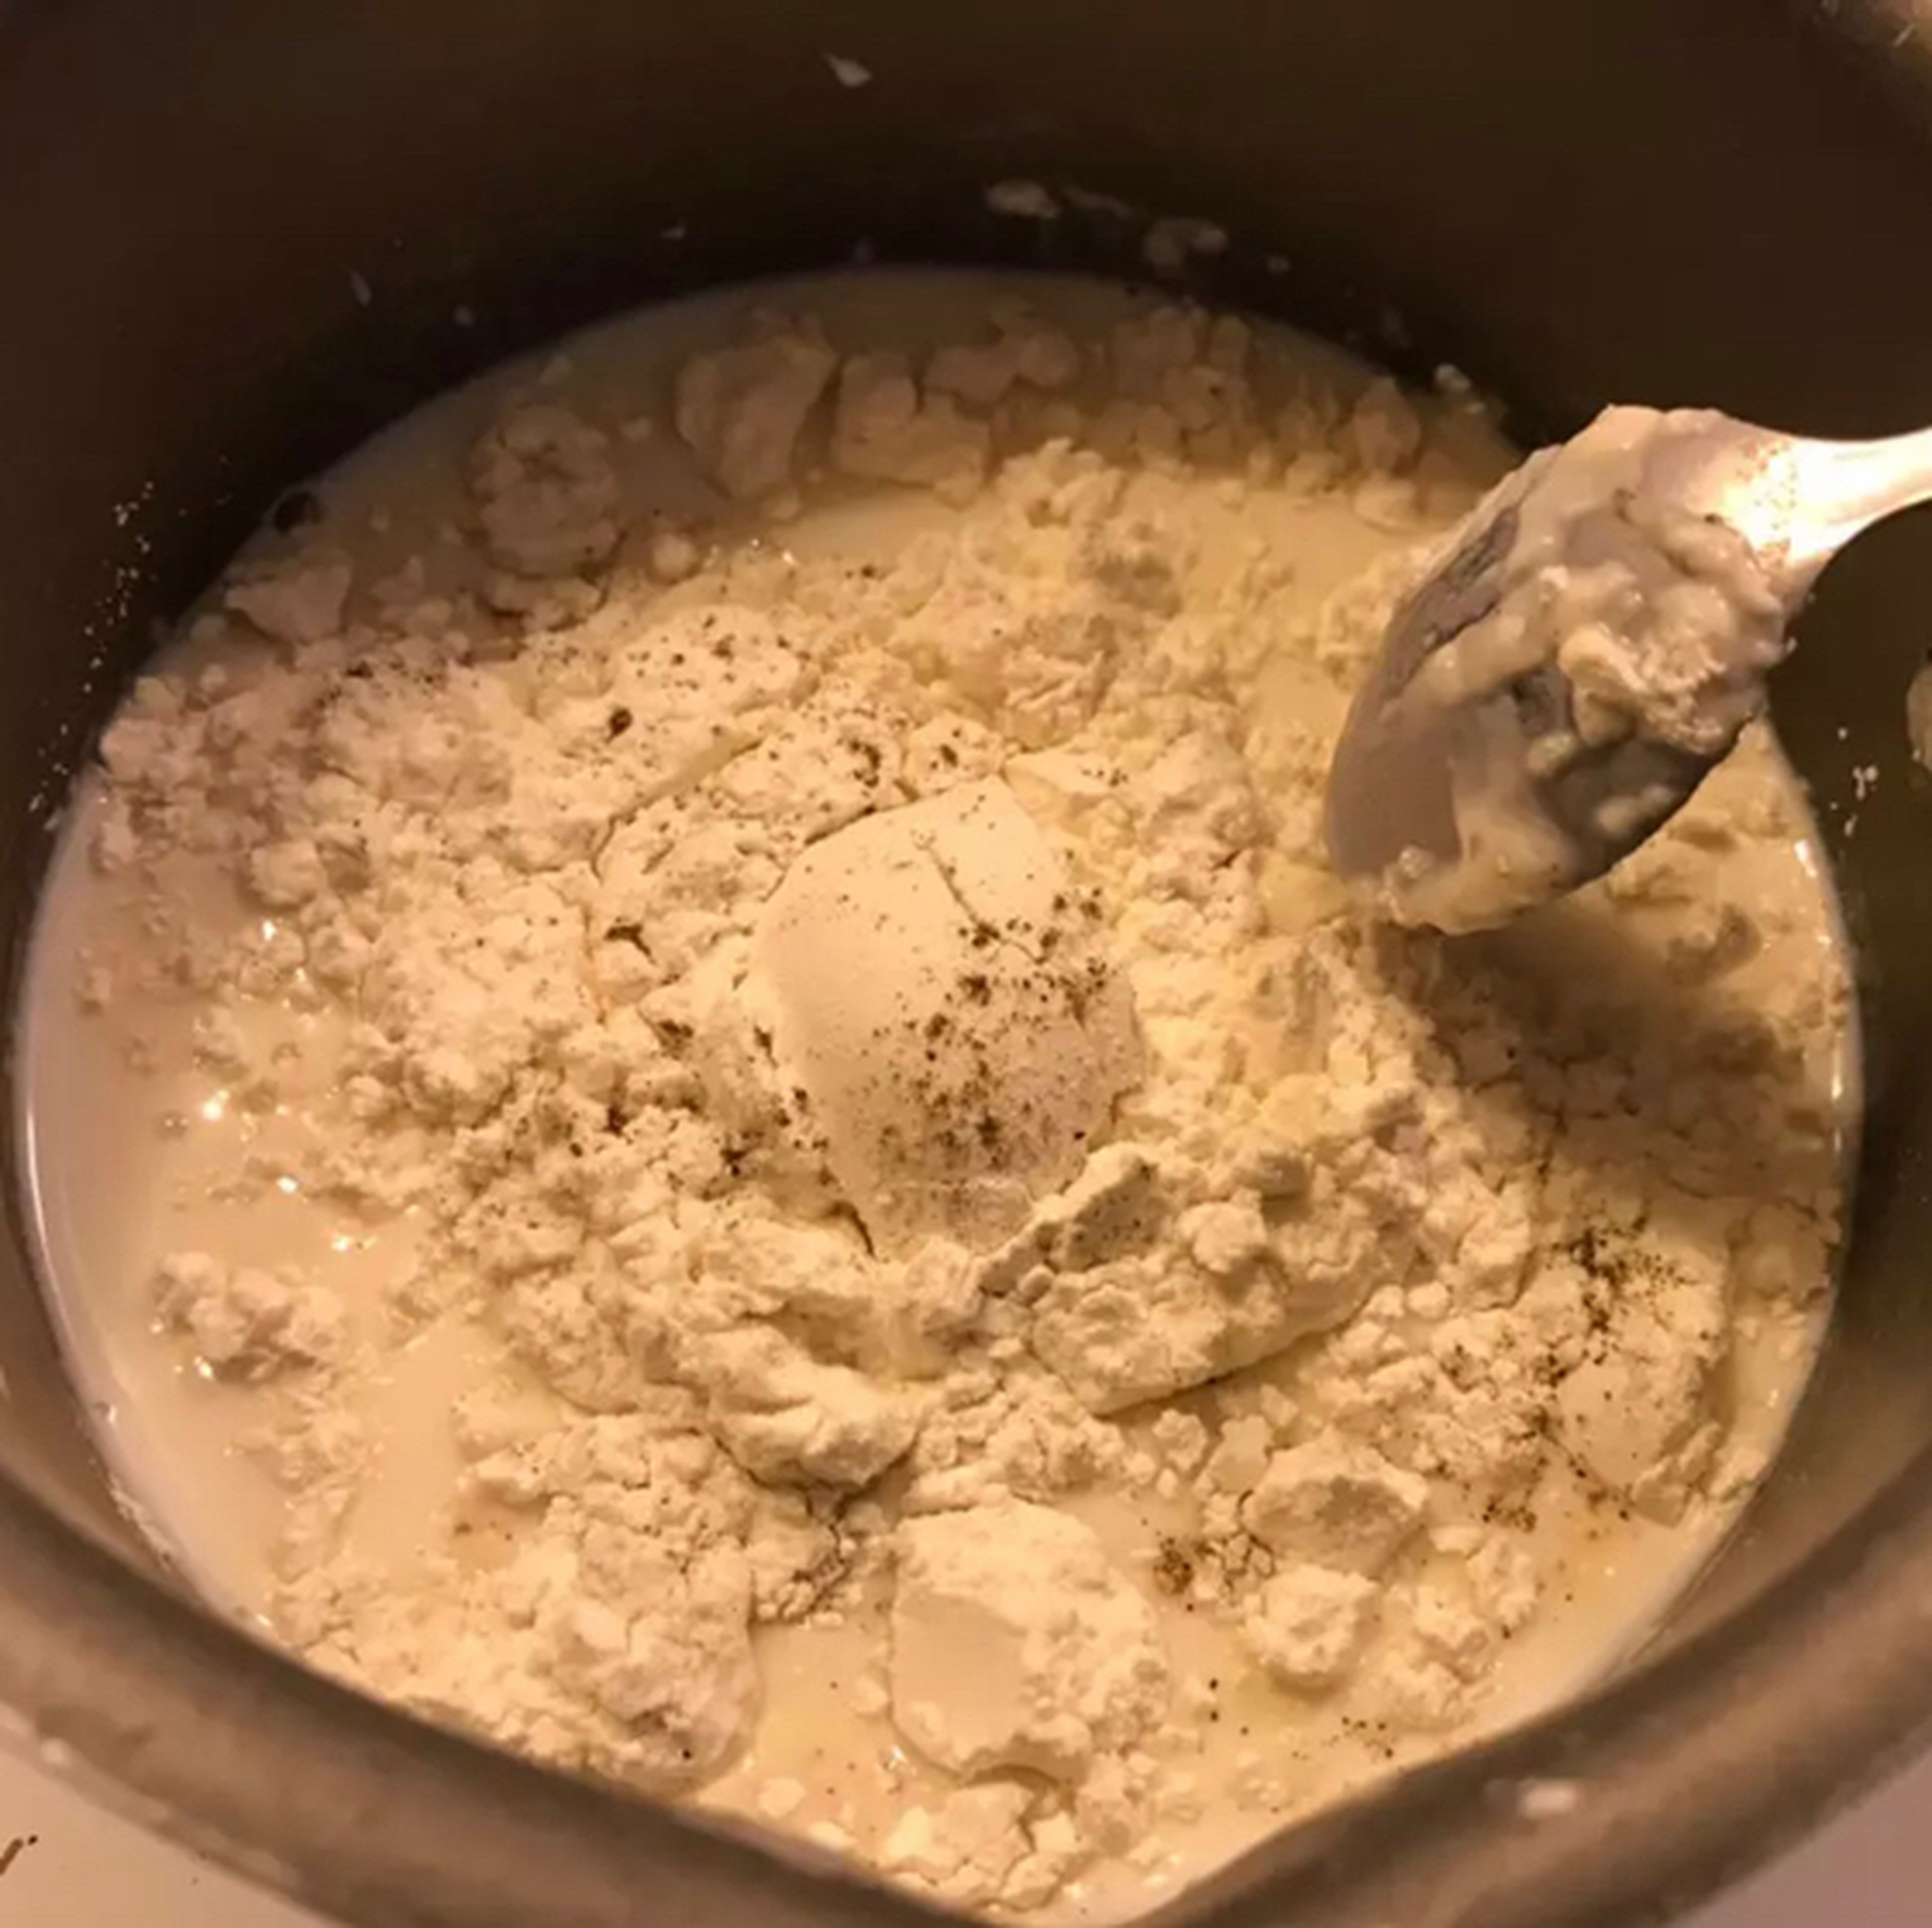 On medium-high heat until the pressure of the pressure cooker goes up, then turn down the flame and let it cook for an hour and a quarter. During this time, prepare the sauce. Pour the flour in cold milk and mix. Add a little salt and pepper and put it on a low heat and stir regularly so that the flour does not become lumps.